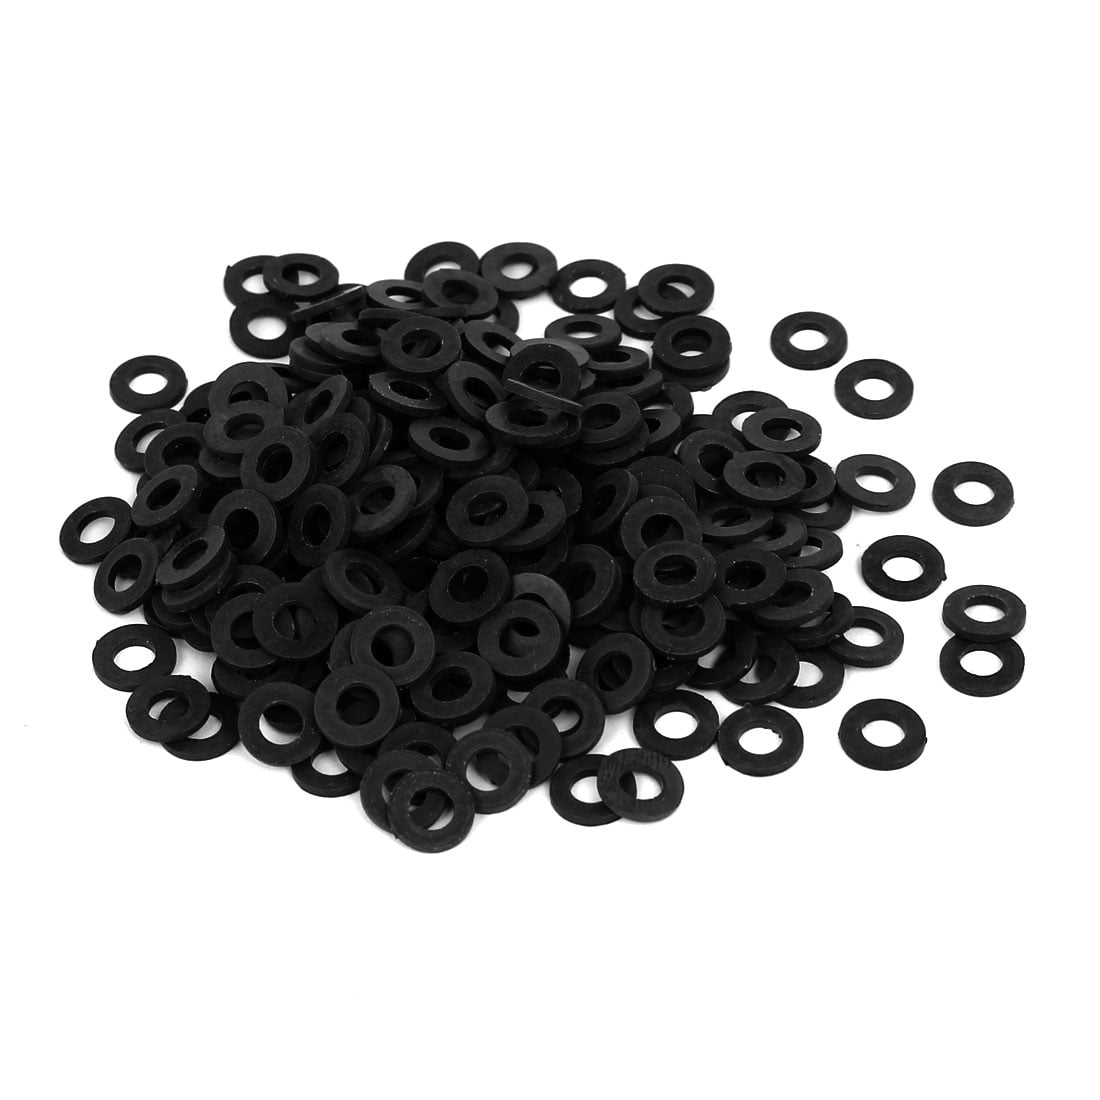 M5 x 10mm x 1mm Nylon Flat Insulating Washers Gaskets Spacers Fastener 400PCS 